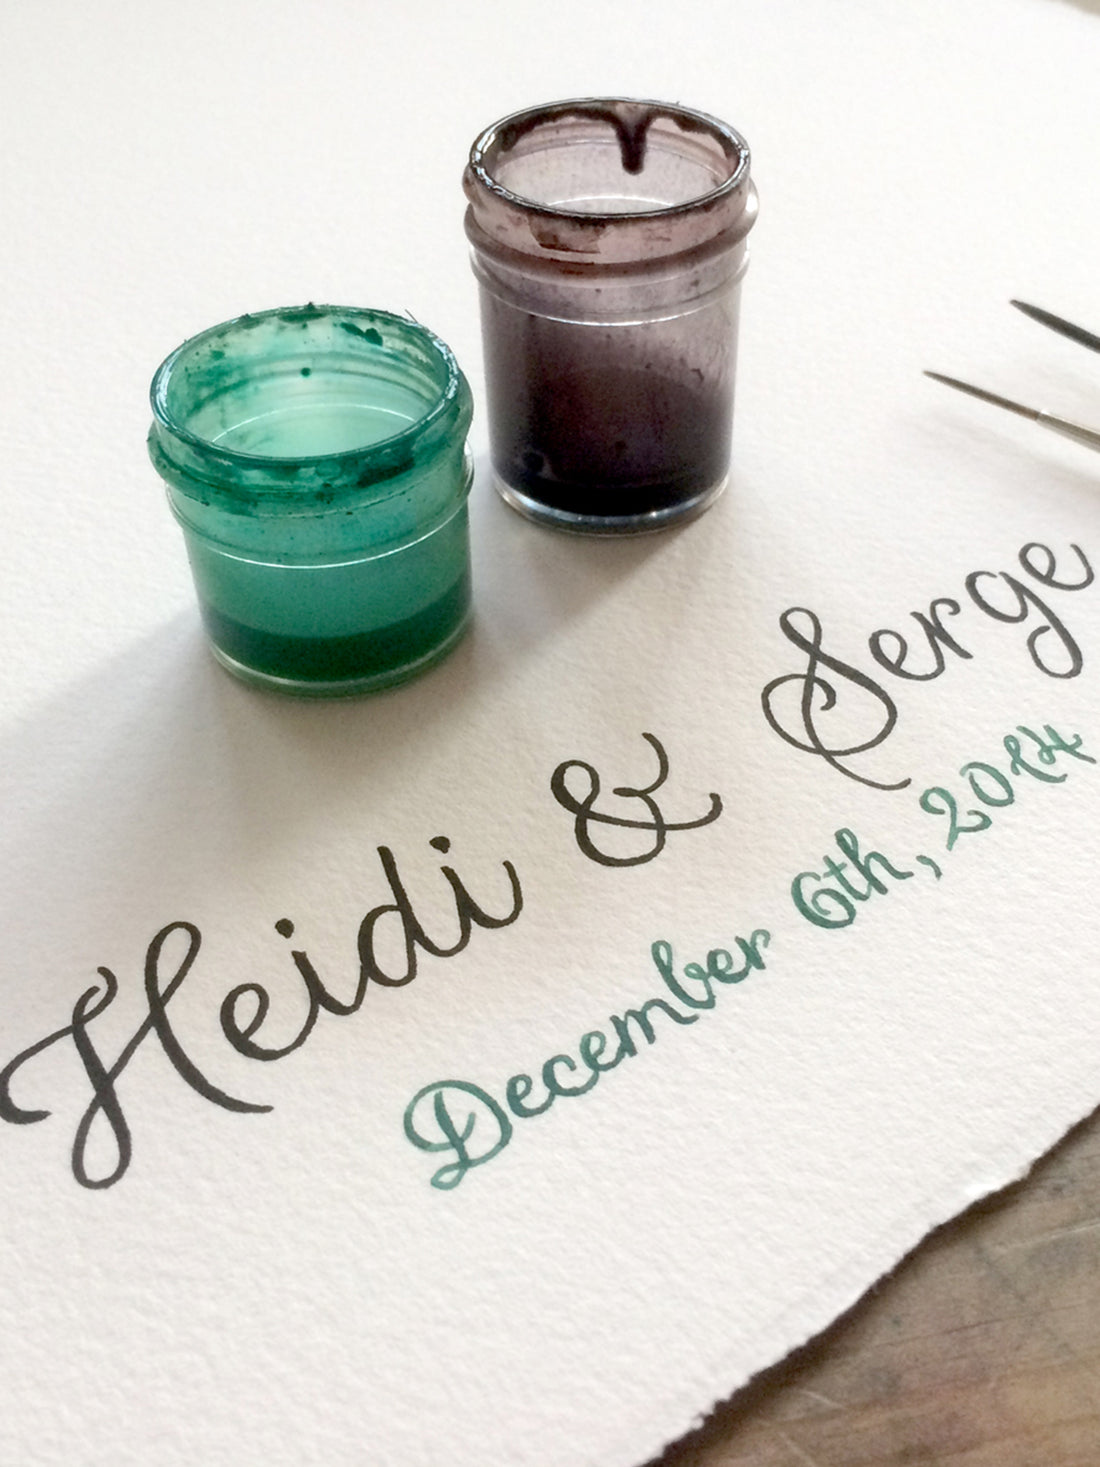 Working on Heidi and Serge winter wedding guest book painting